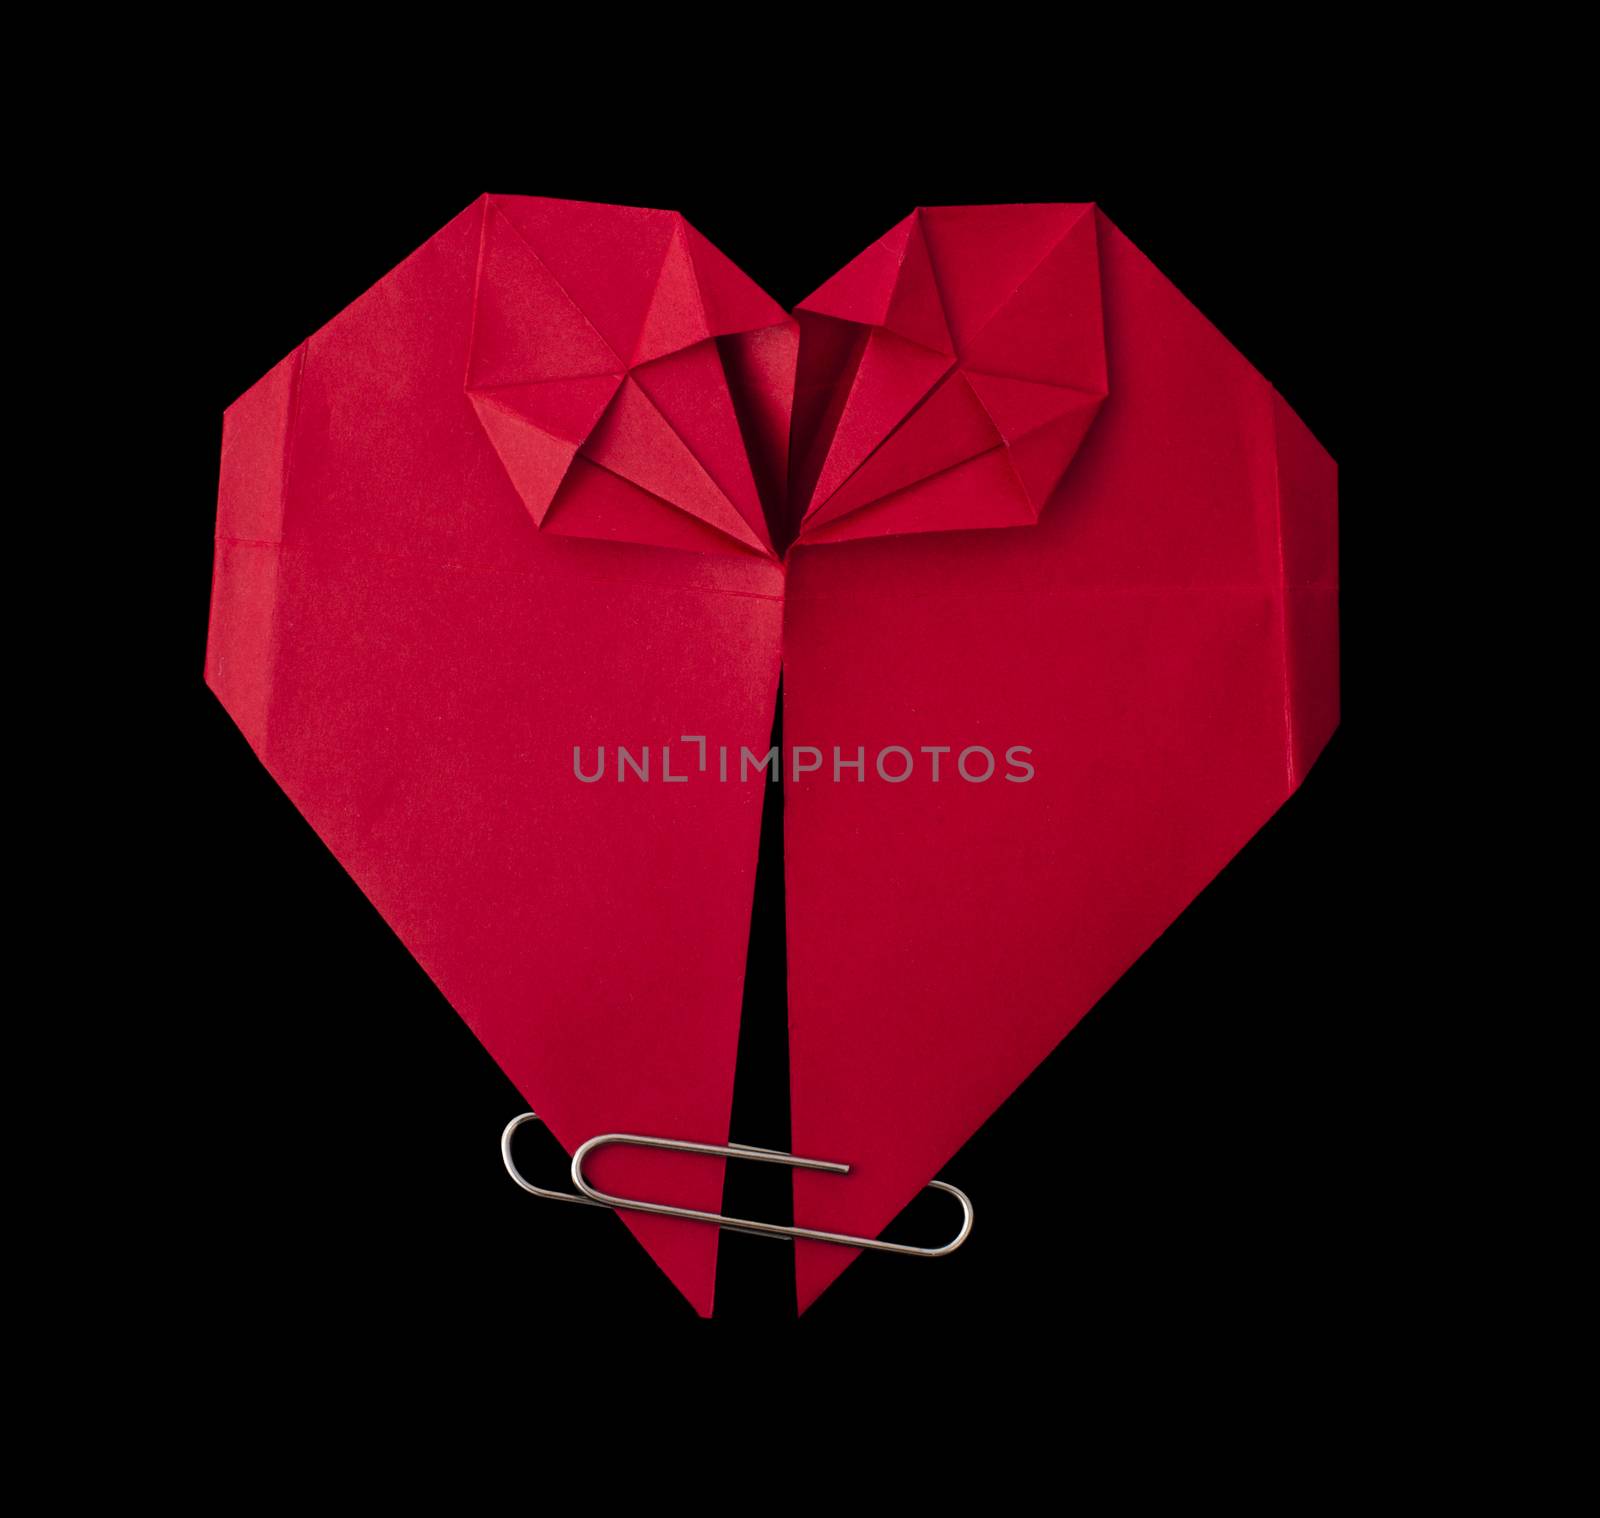 Origami red heart. Black isolated